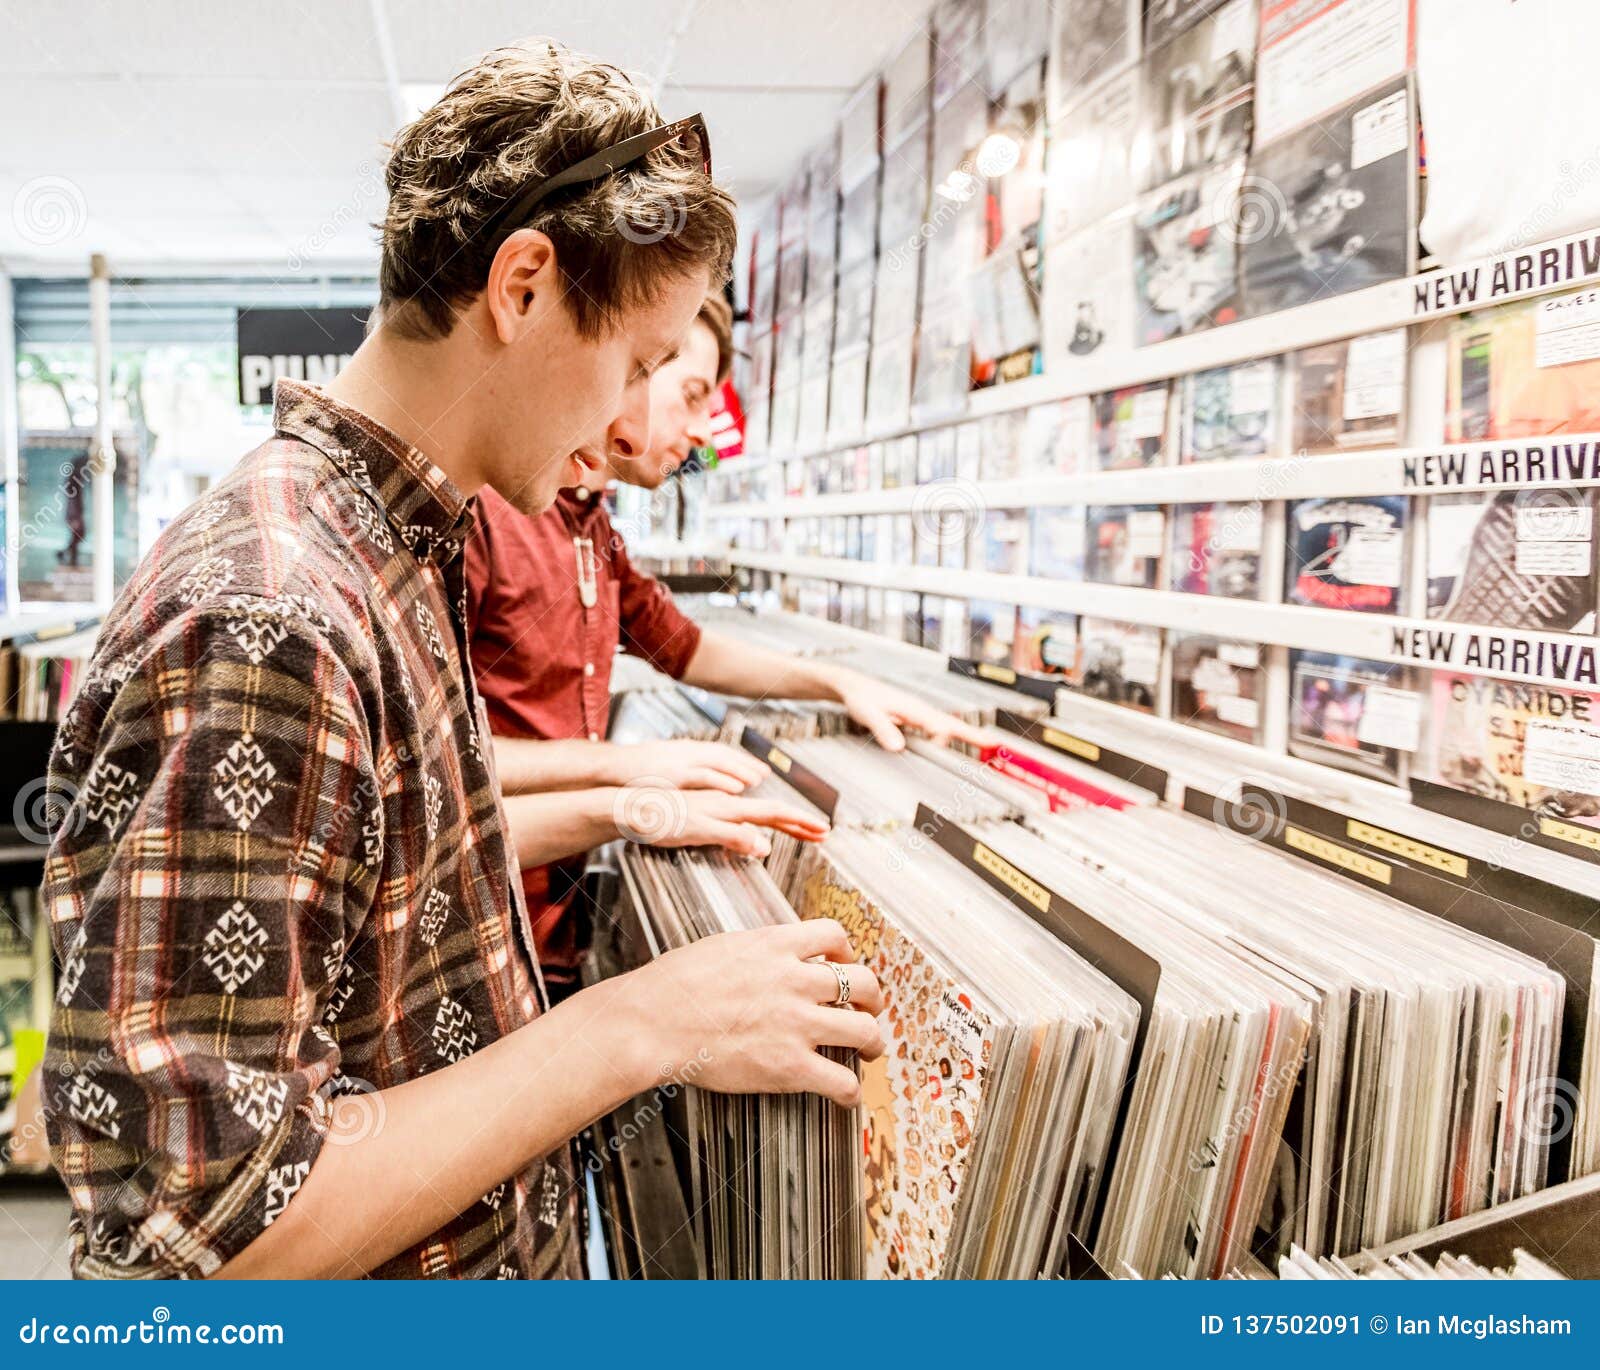 young-man-looking-vinyl-records-shop-buying-vinyl-records-lp-s-browsing-music-record-shop-buying-inch-137502091.jpg